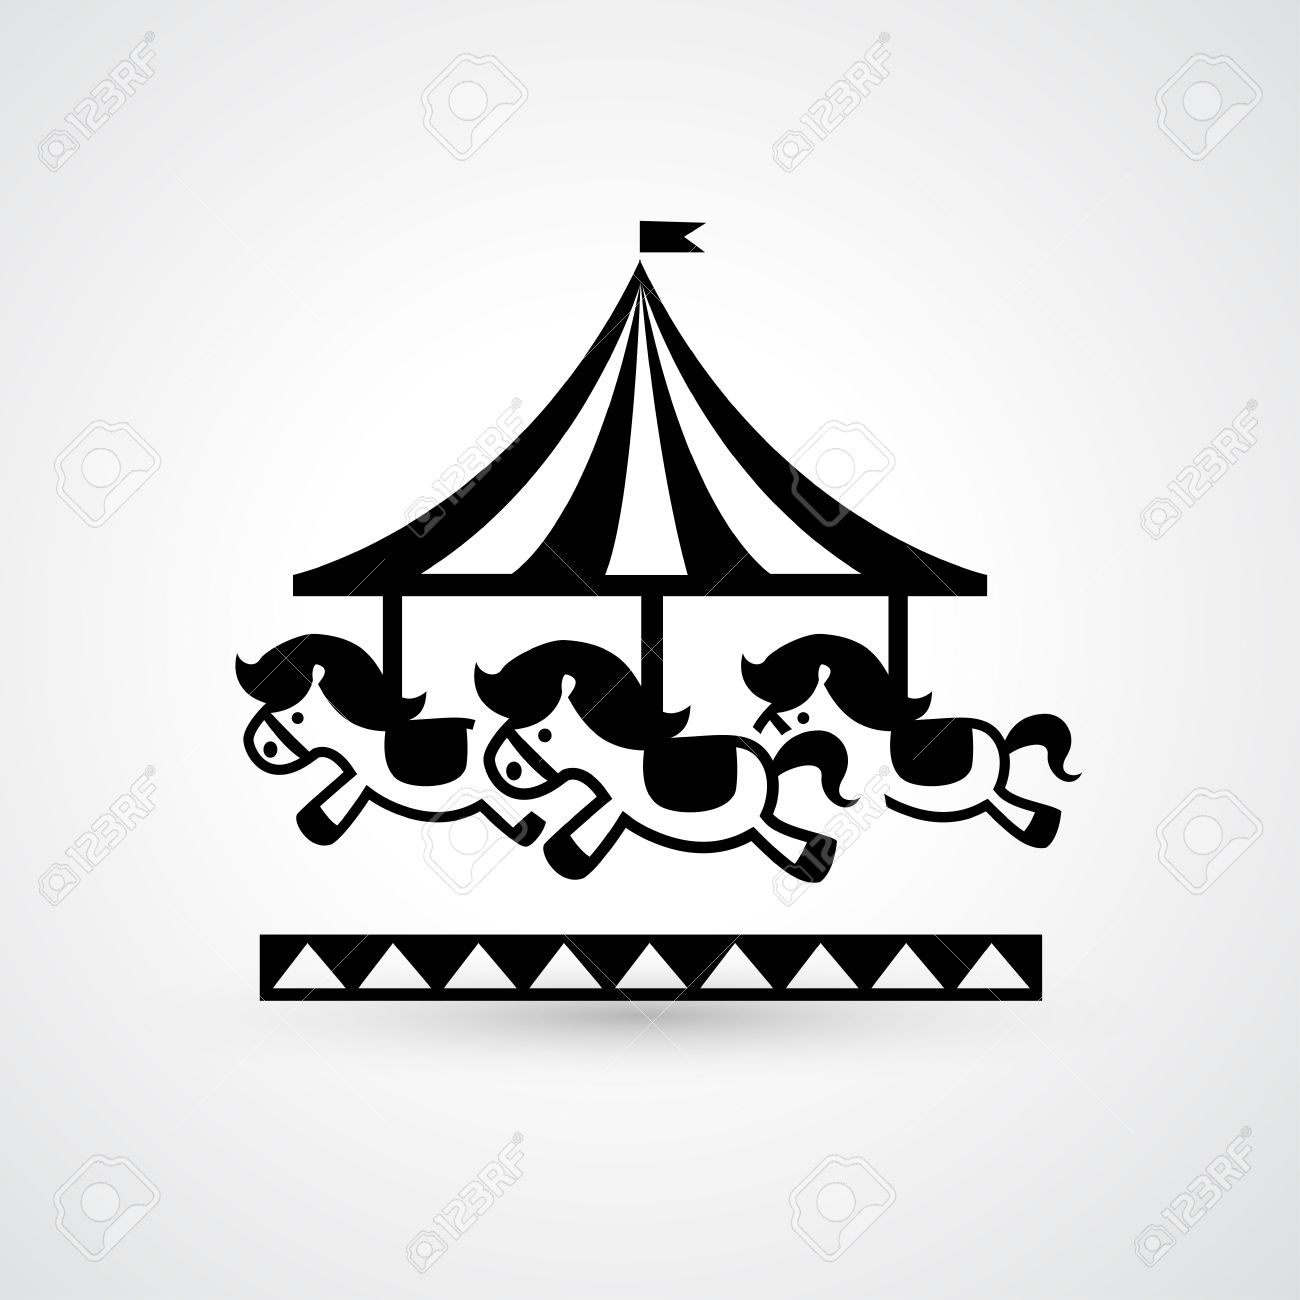 Carousel With Horse Icon Royalty Free Cliparts, Vectors, And Stock 